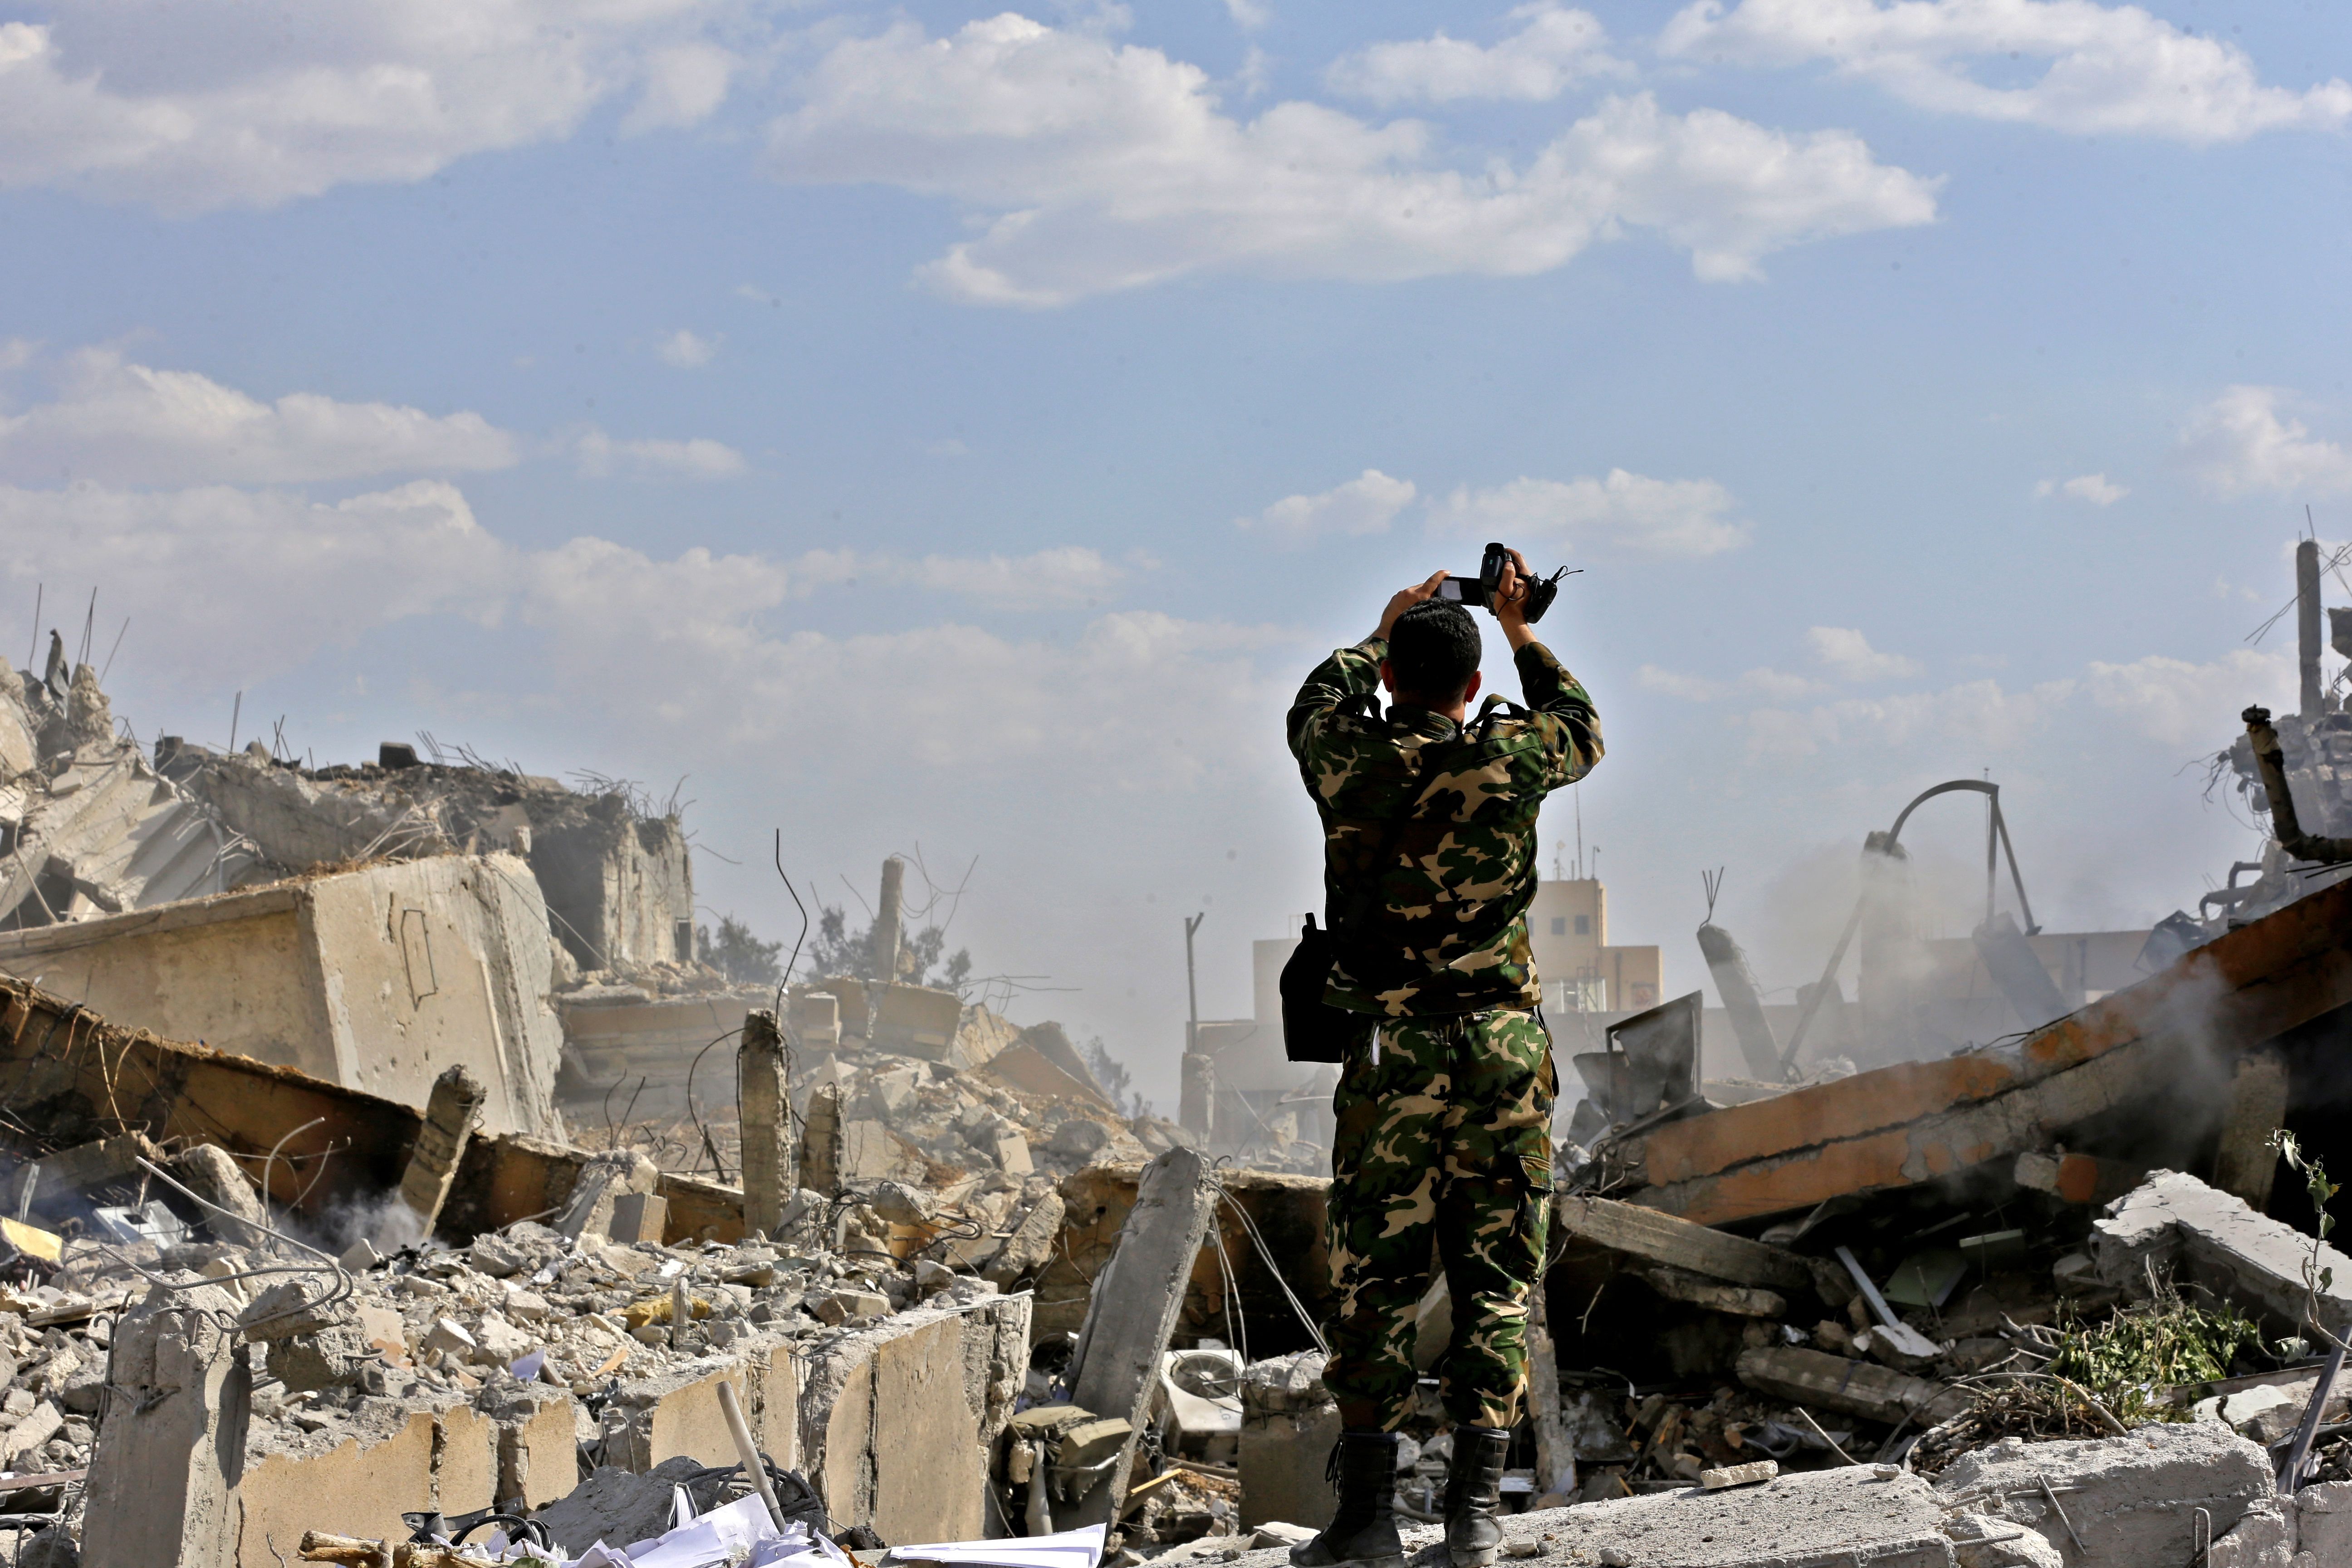 TOPSHOT - A Syrian soldier inspects the wreckage of a building described as part of the Scientific Studies and Research Centre (SSRC) compound in the Barzeh district, north of Damascus, during a press tour organised by the Syrian information ministry, on April 14, 2018. - The United States, Britain and France launched strikes against Syrian President Bashar al-Assad's regime early on April 14 in response to an alleged chemical weapons attack after mulling military action for nearly a week. Syrian state news agency SANA reported several missiles hit a research centre in Barzeh, north of Damascus, "destroying a building that included scientific labs and a training centre". (Photo by LOUAI BESHARA / AFP) 